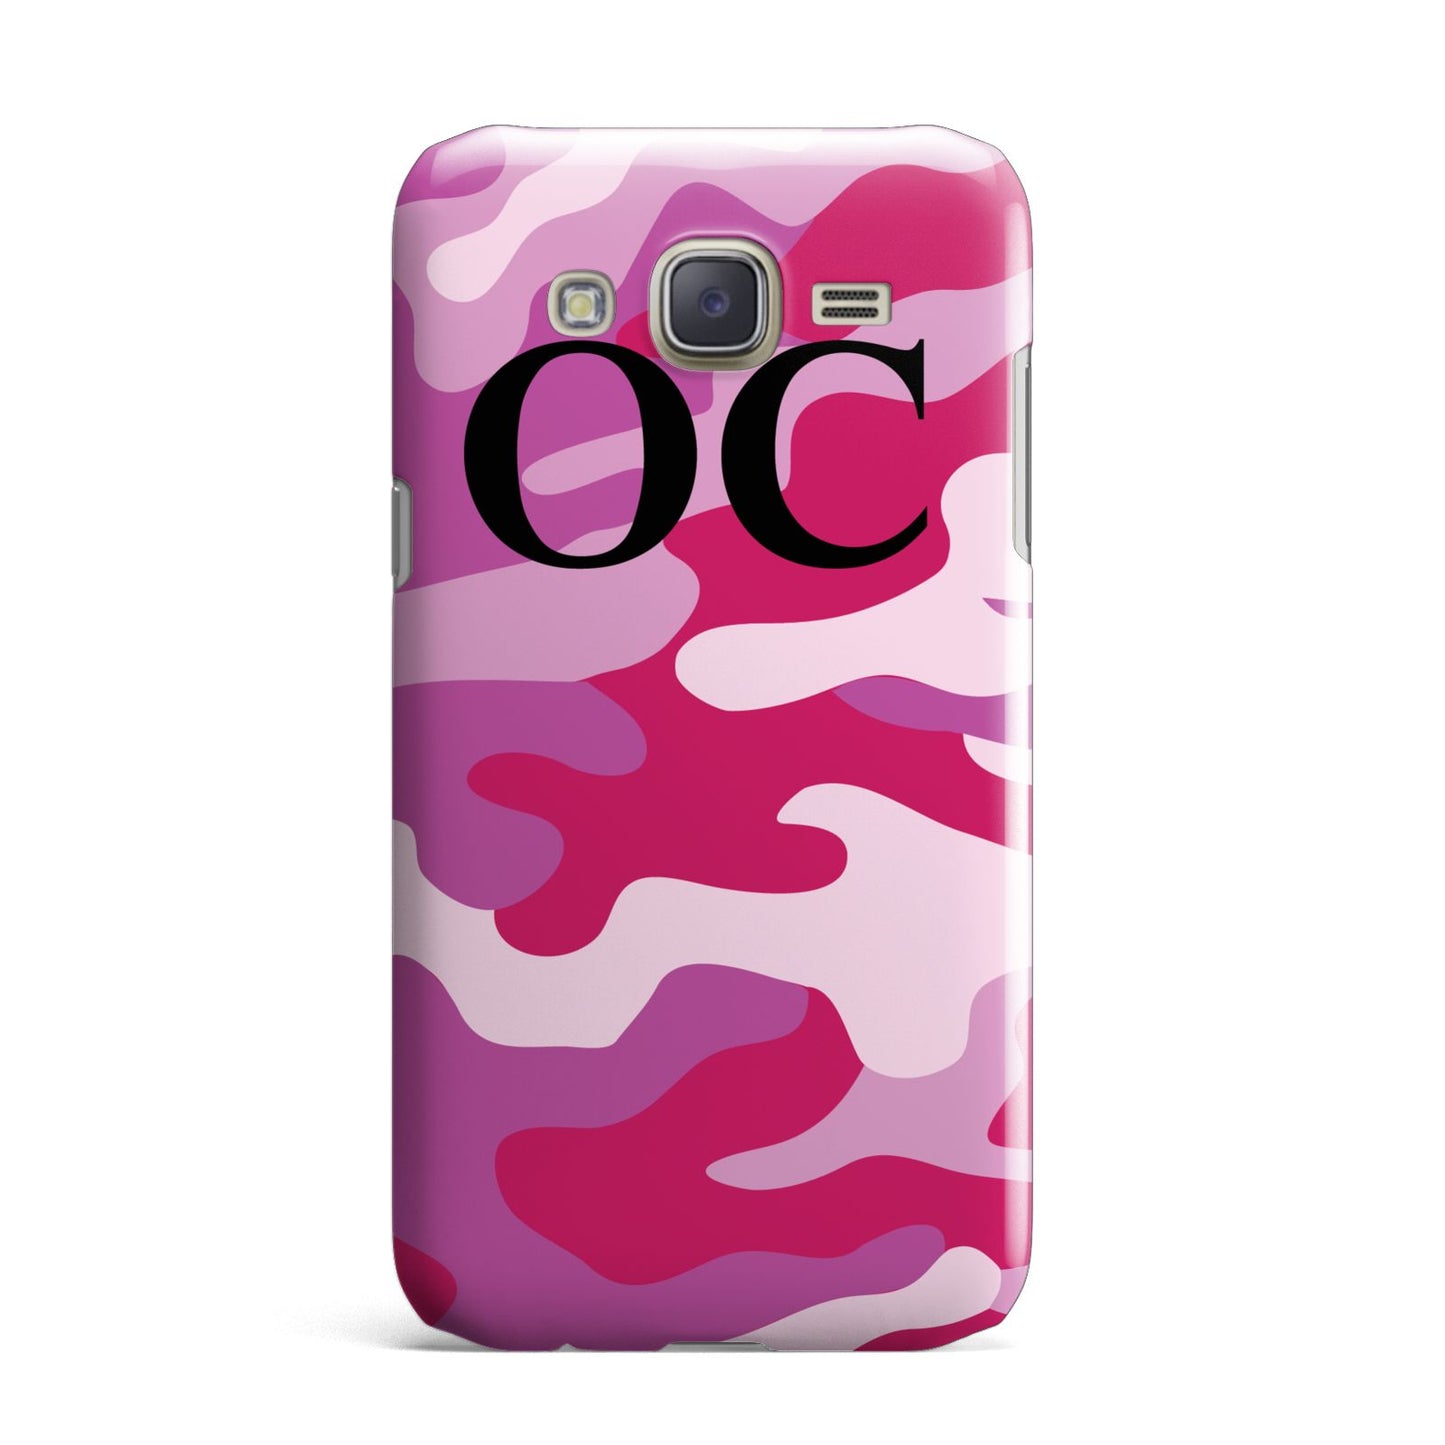 Camouflage Personalised Samsung Galaxy J7 Case